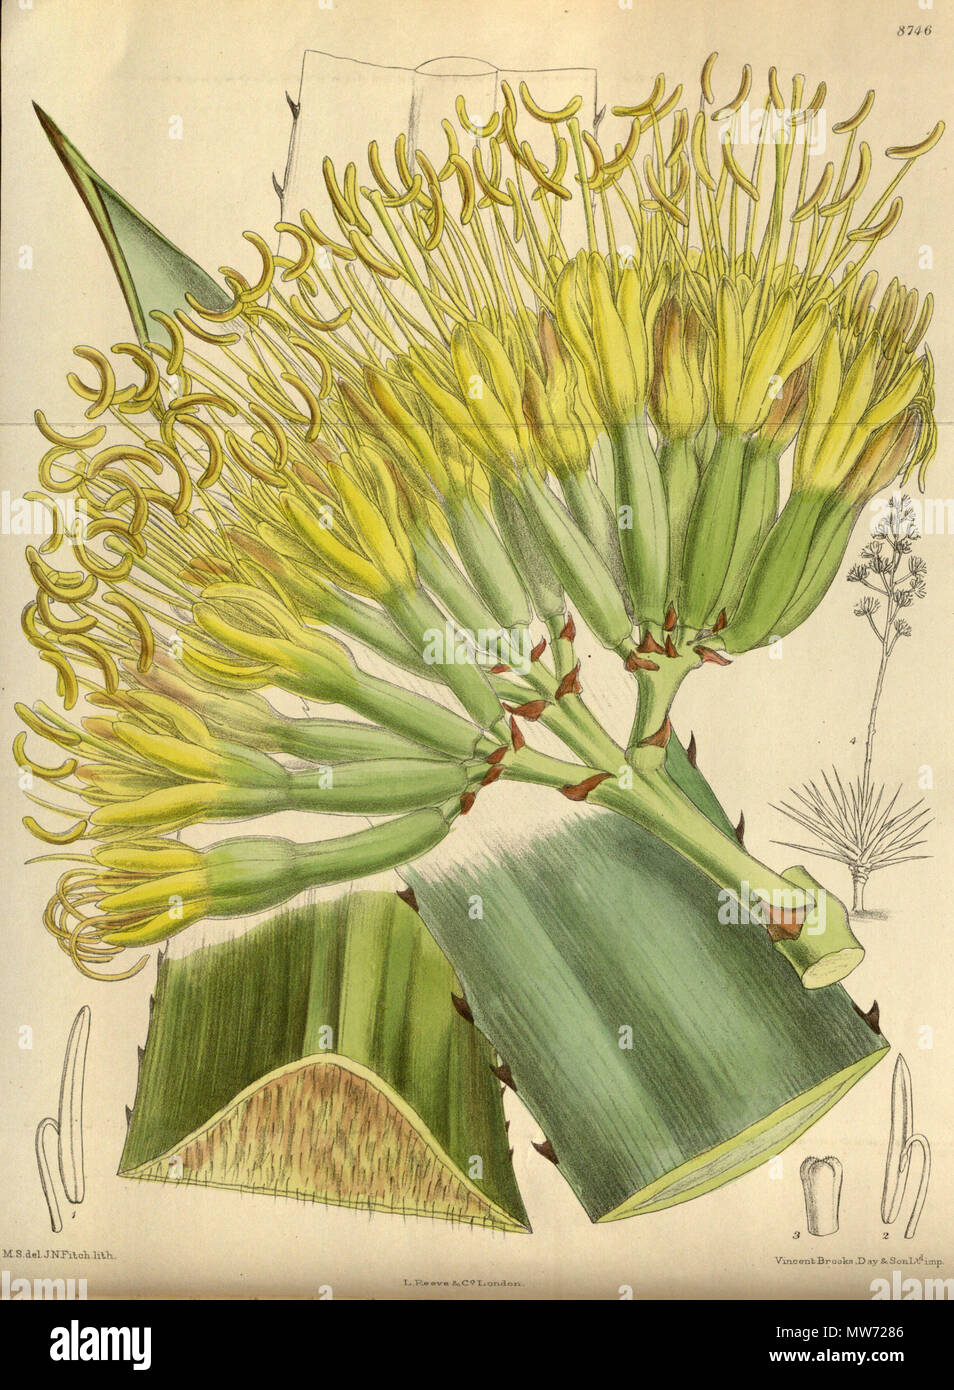 . Agave fourcroydes, Asparagaceae, Agavoideae . 1918. M.S. del., J.N.Fitch lith. 29 Agave fourcroydes 144-8746 Stock Photo